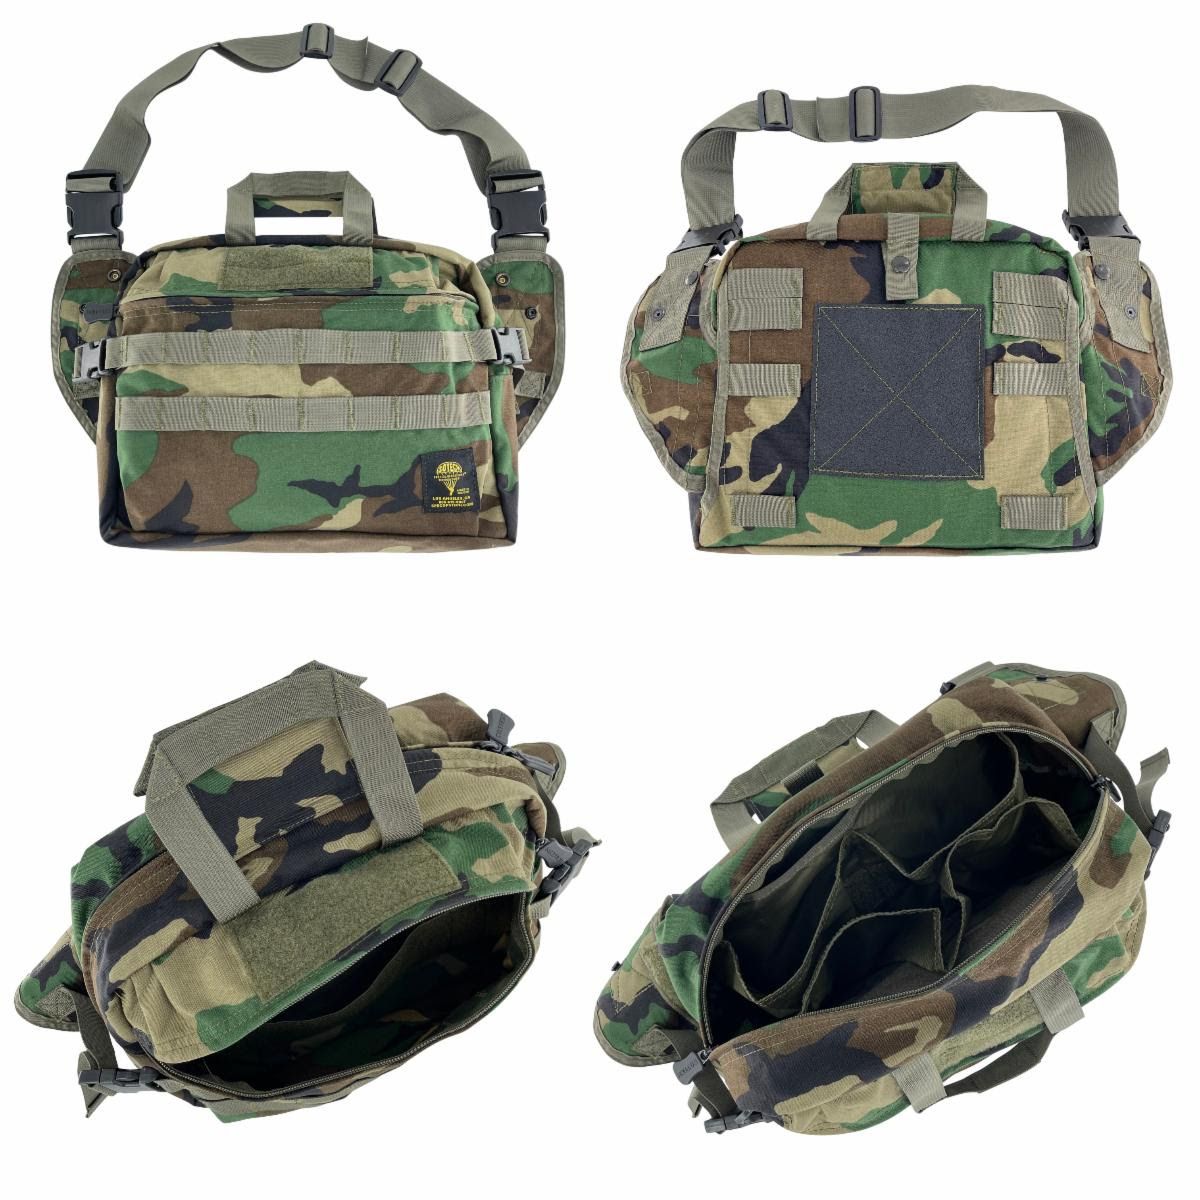 The Iconic S.O.Tech Mission Go bag in M81 Woodland Drops this